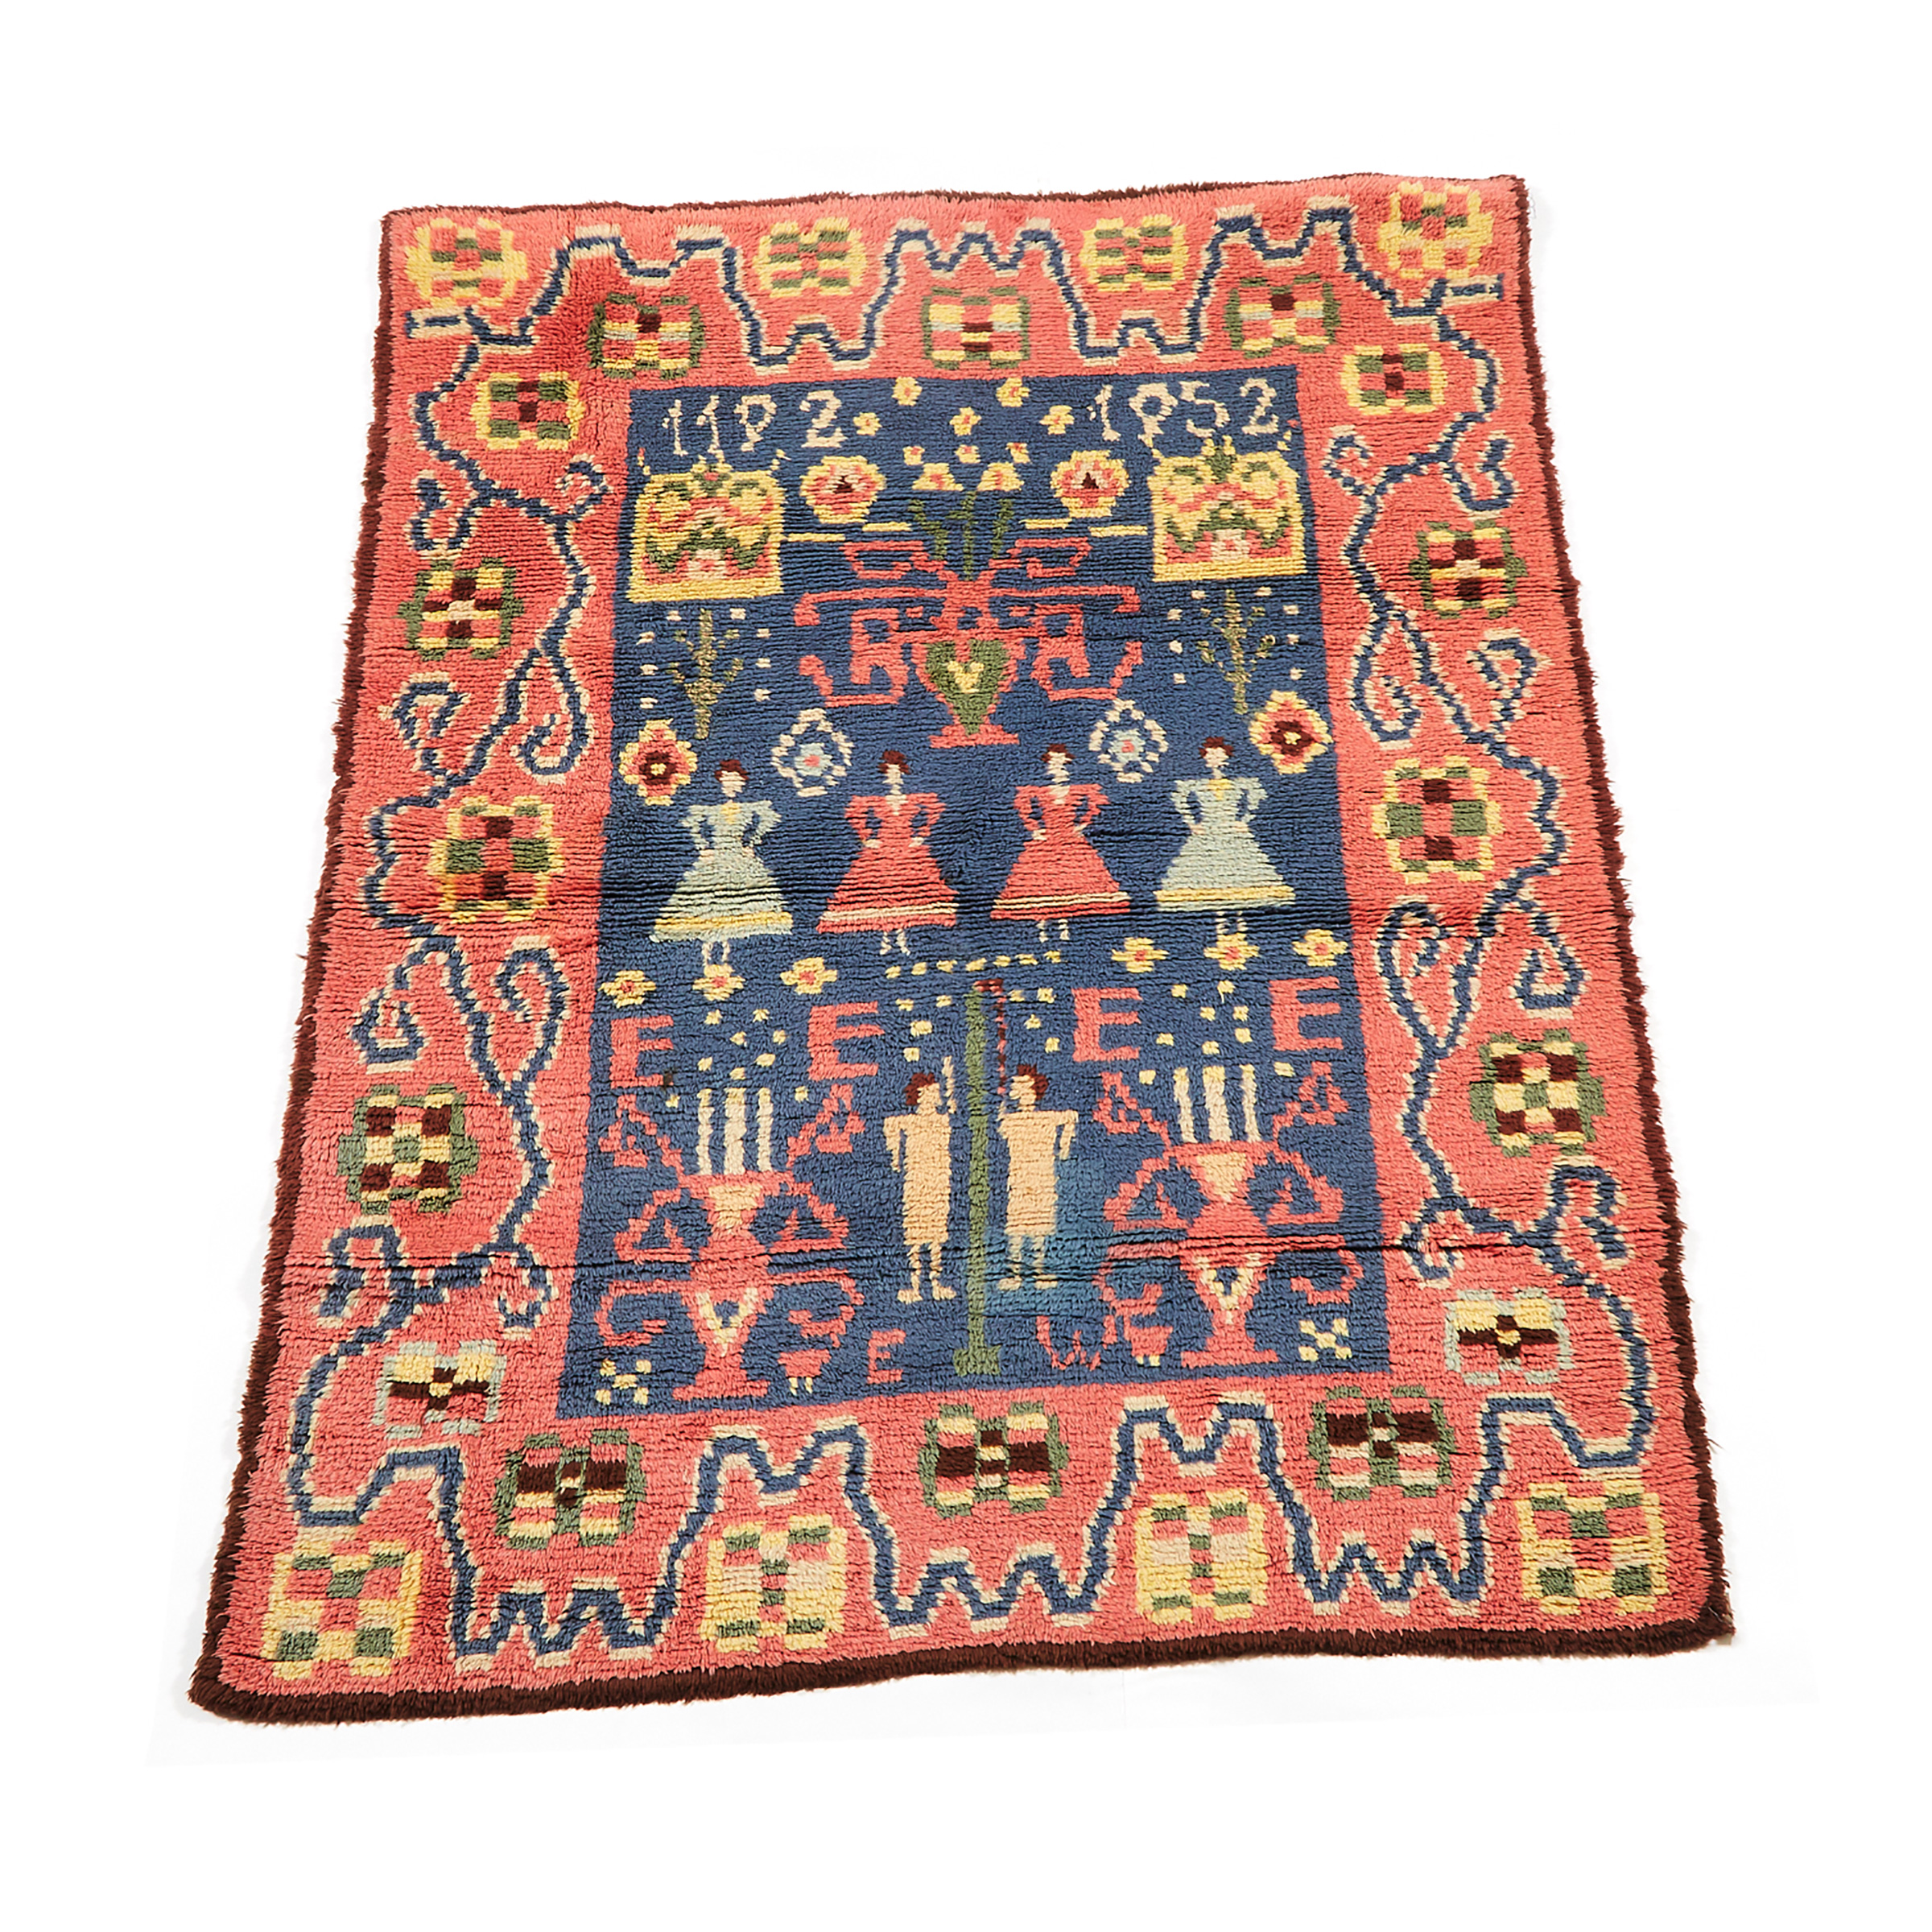 Romanian Rug, dated 1952